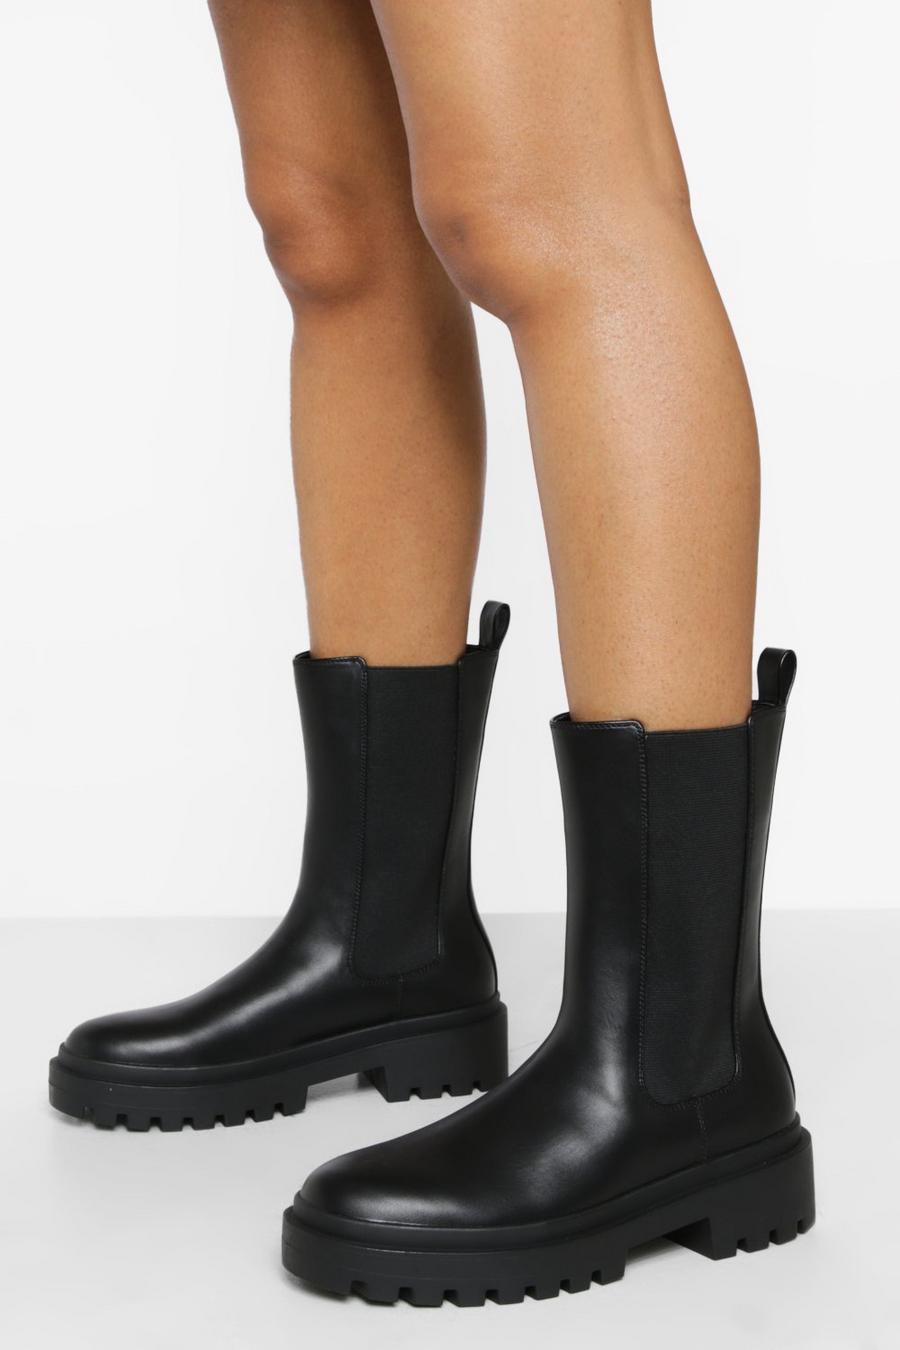 Black Double Sole Calf Height Chelsea Boot